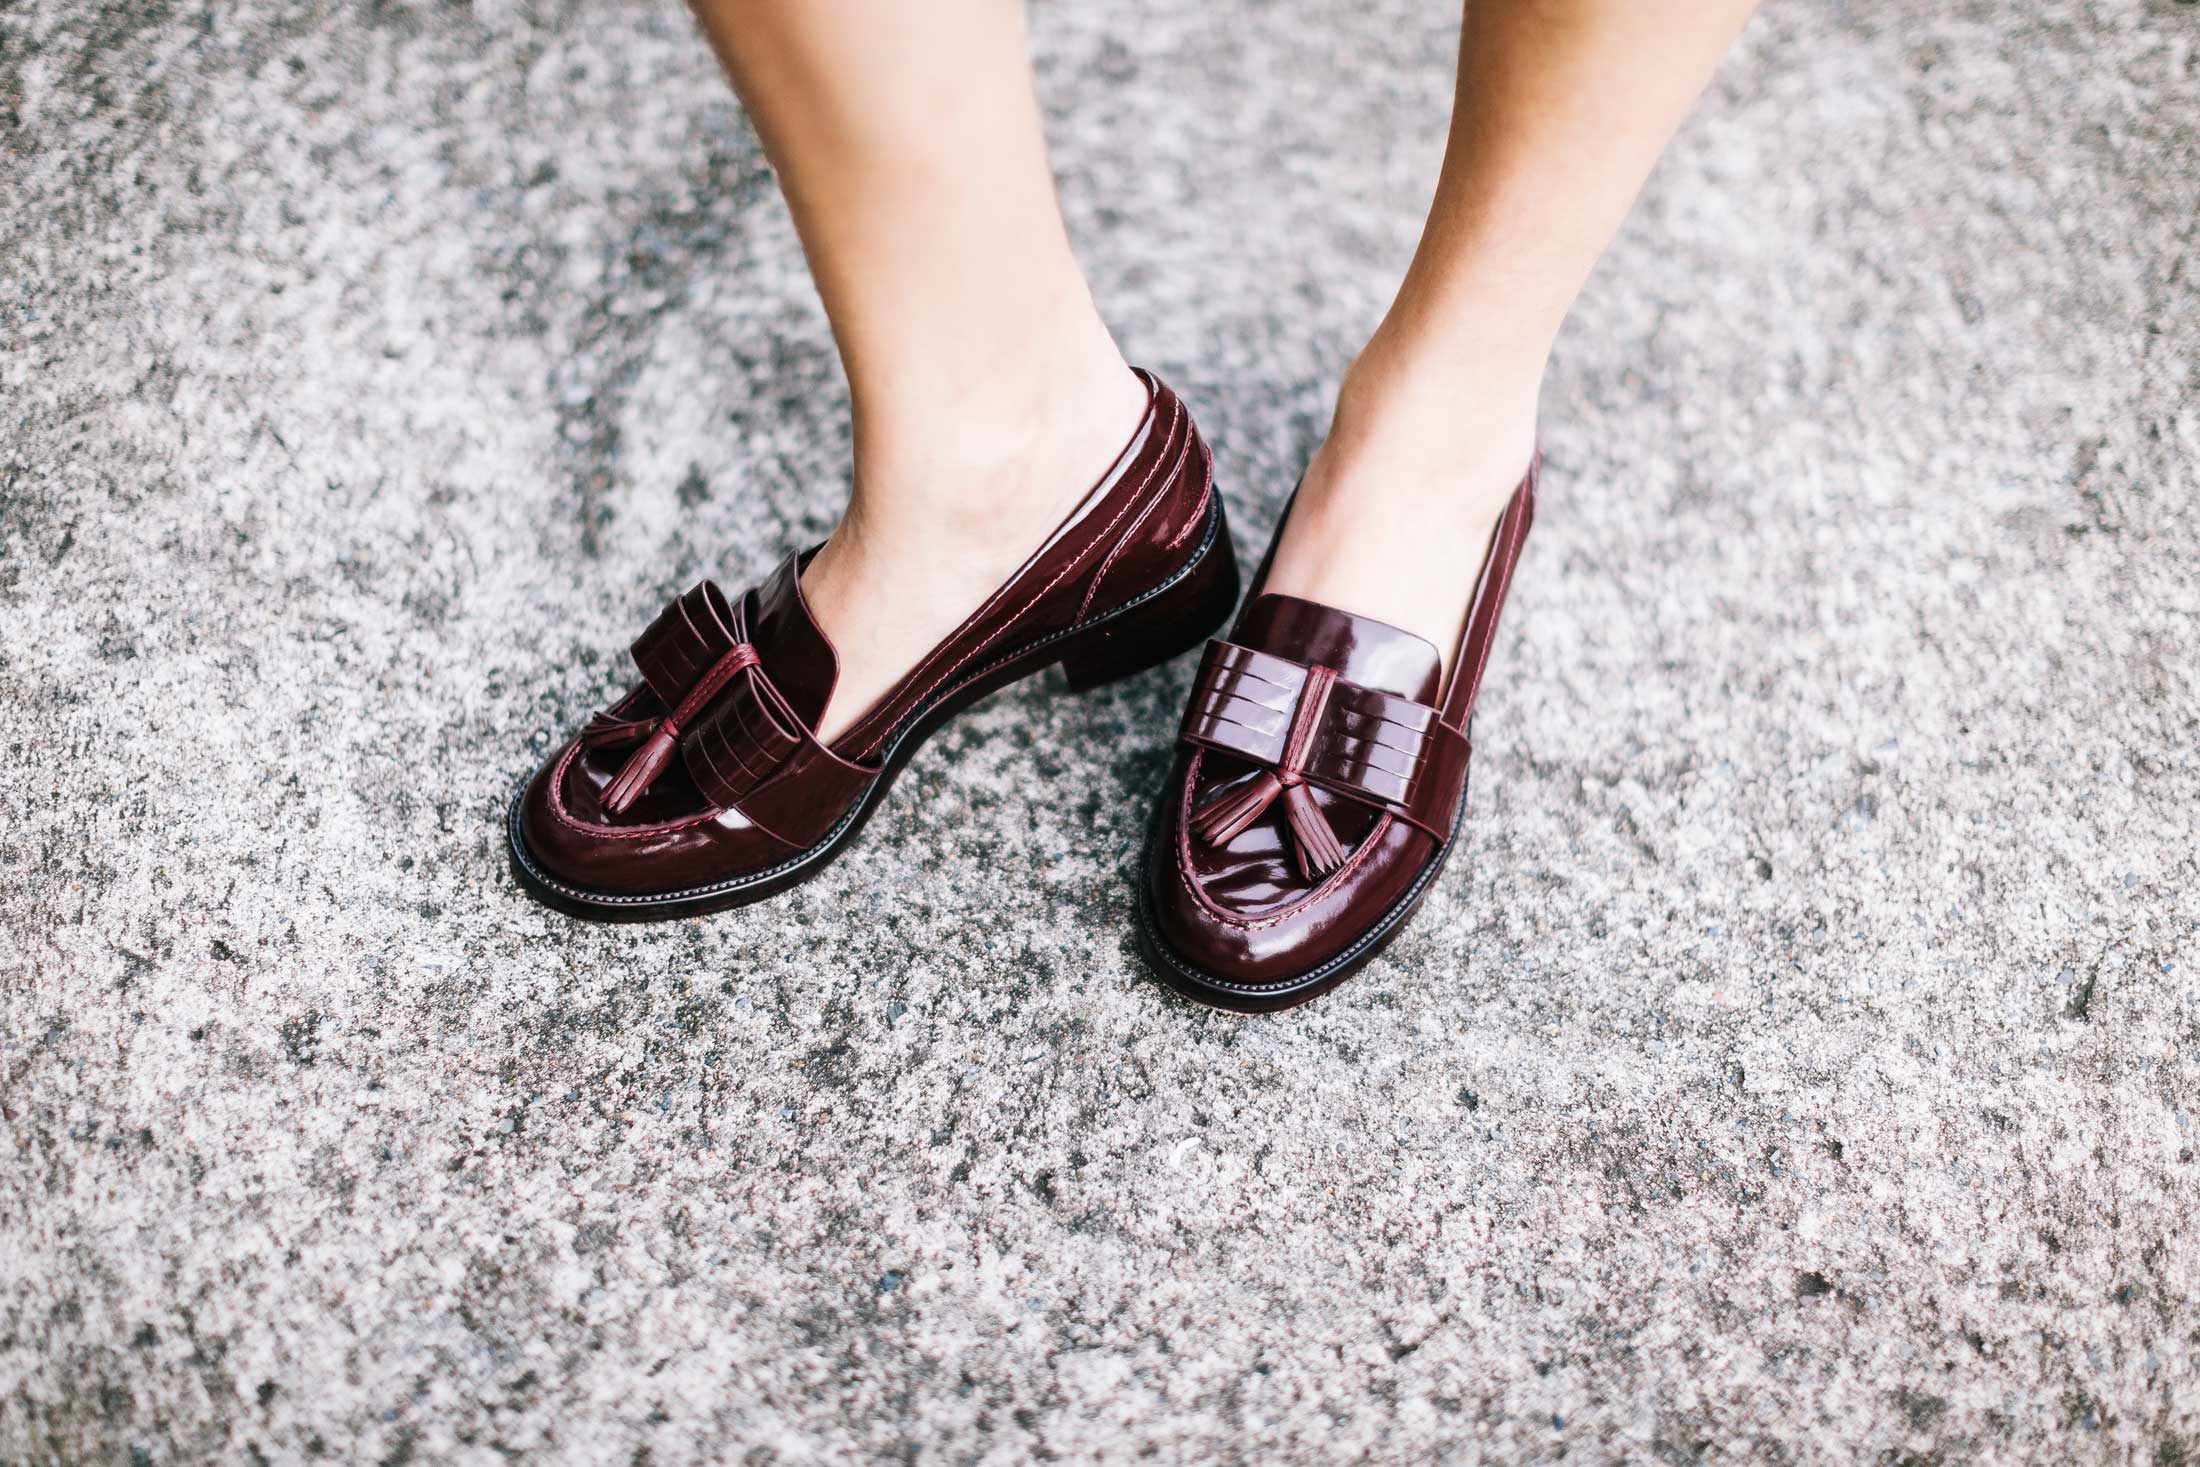 Tory Burch burgundy loafers